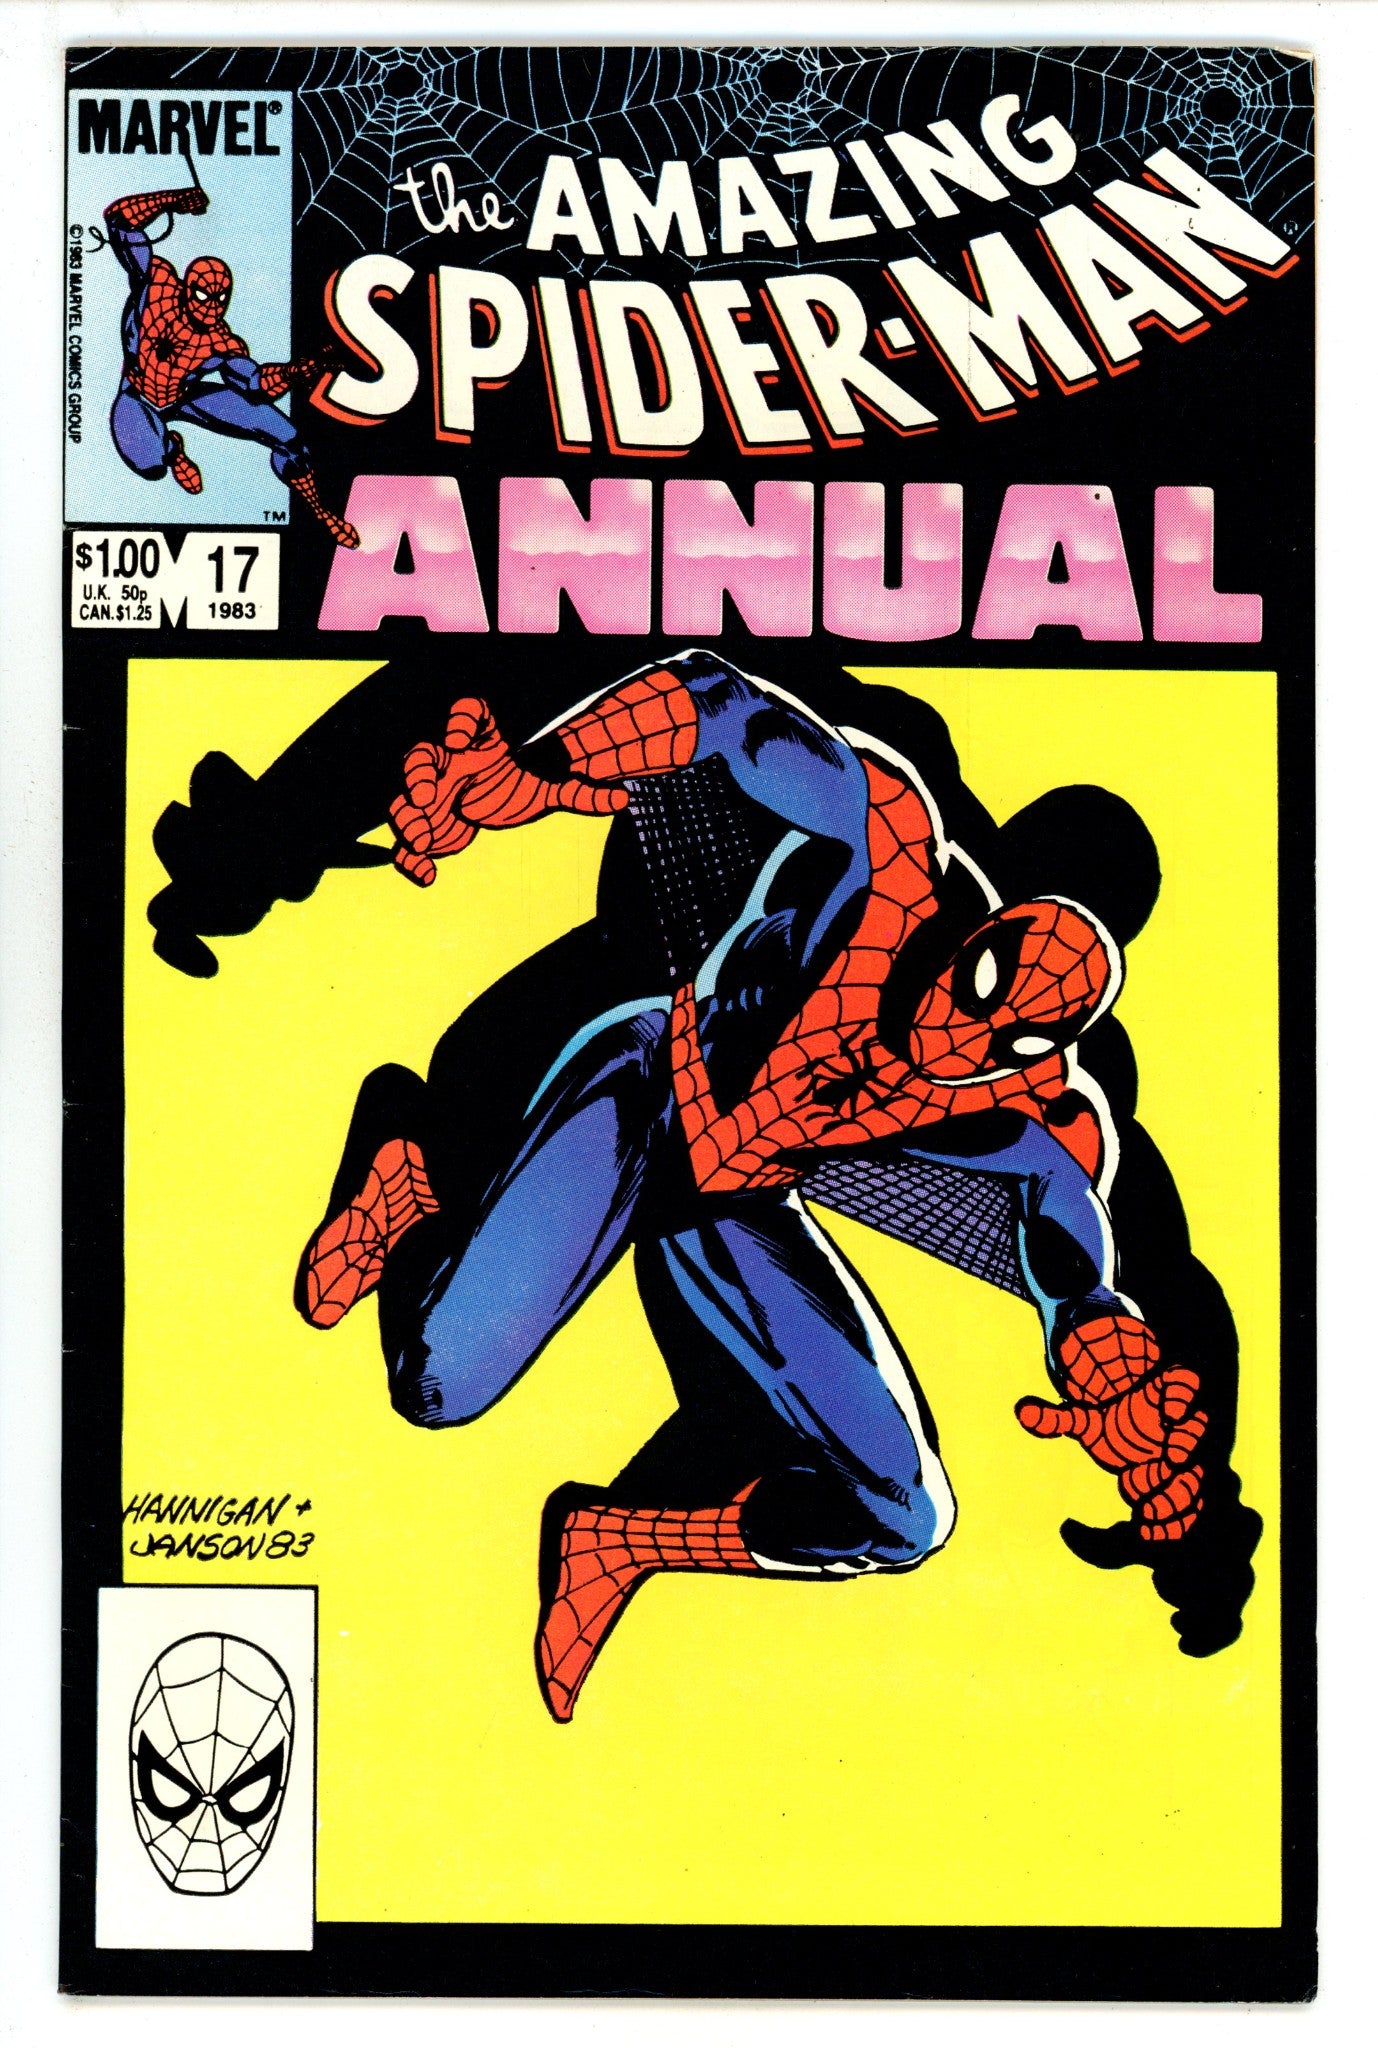 The Amazing Spider-Man Annual Vol 1 17 FN (6.0) (1983) 